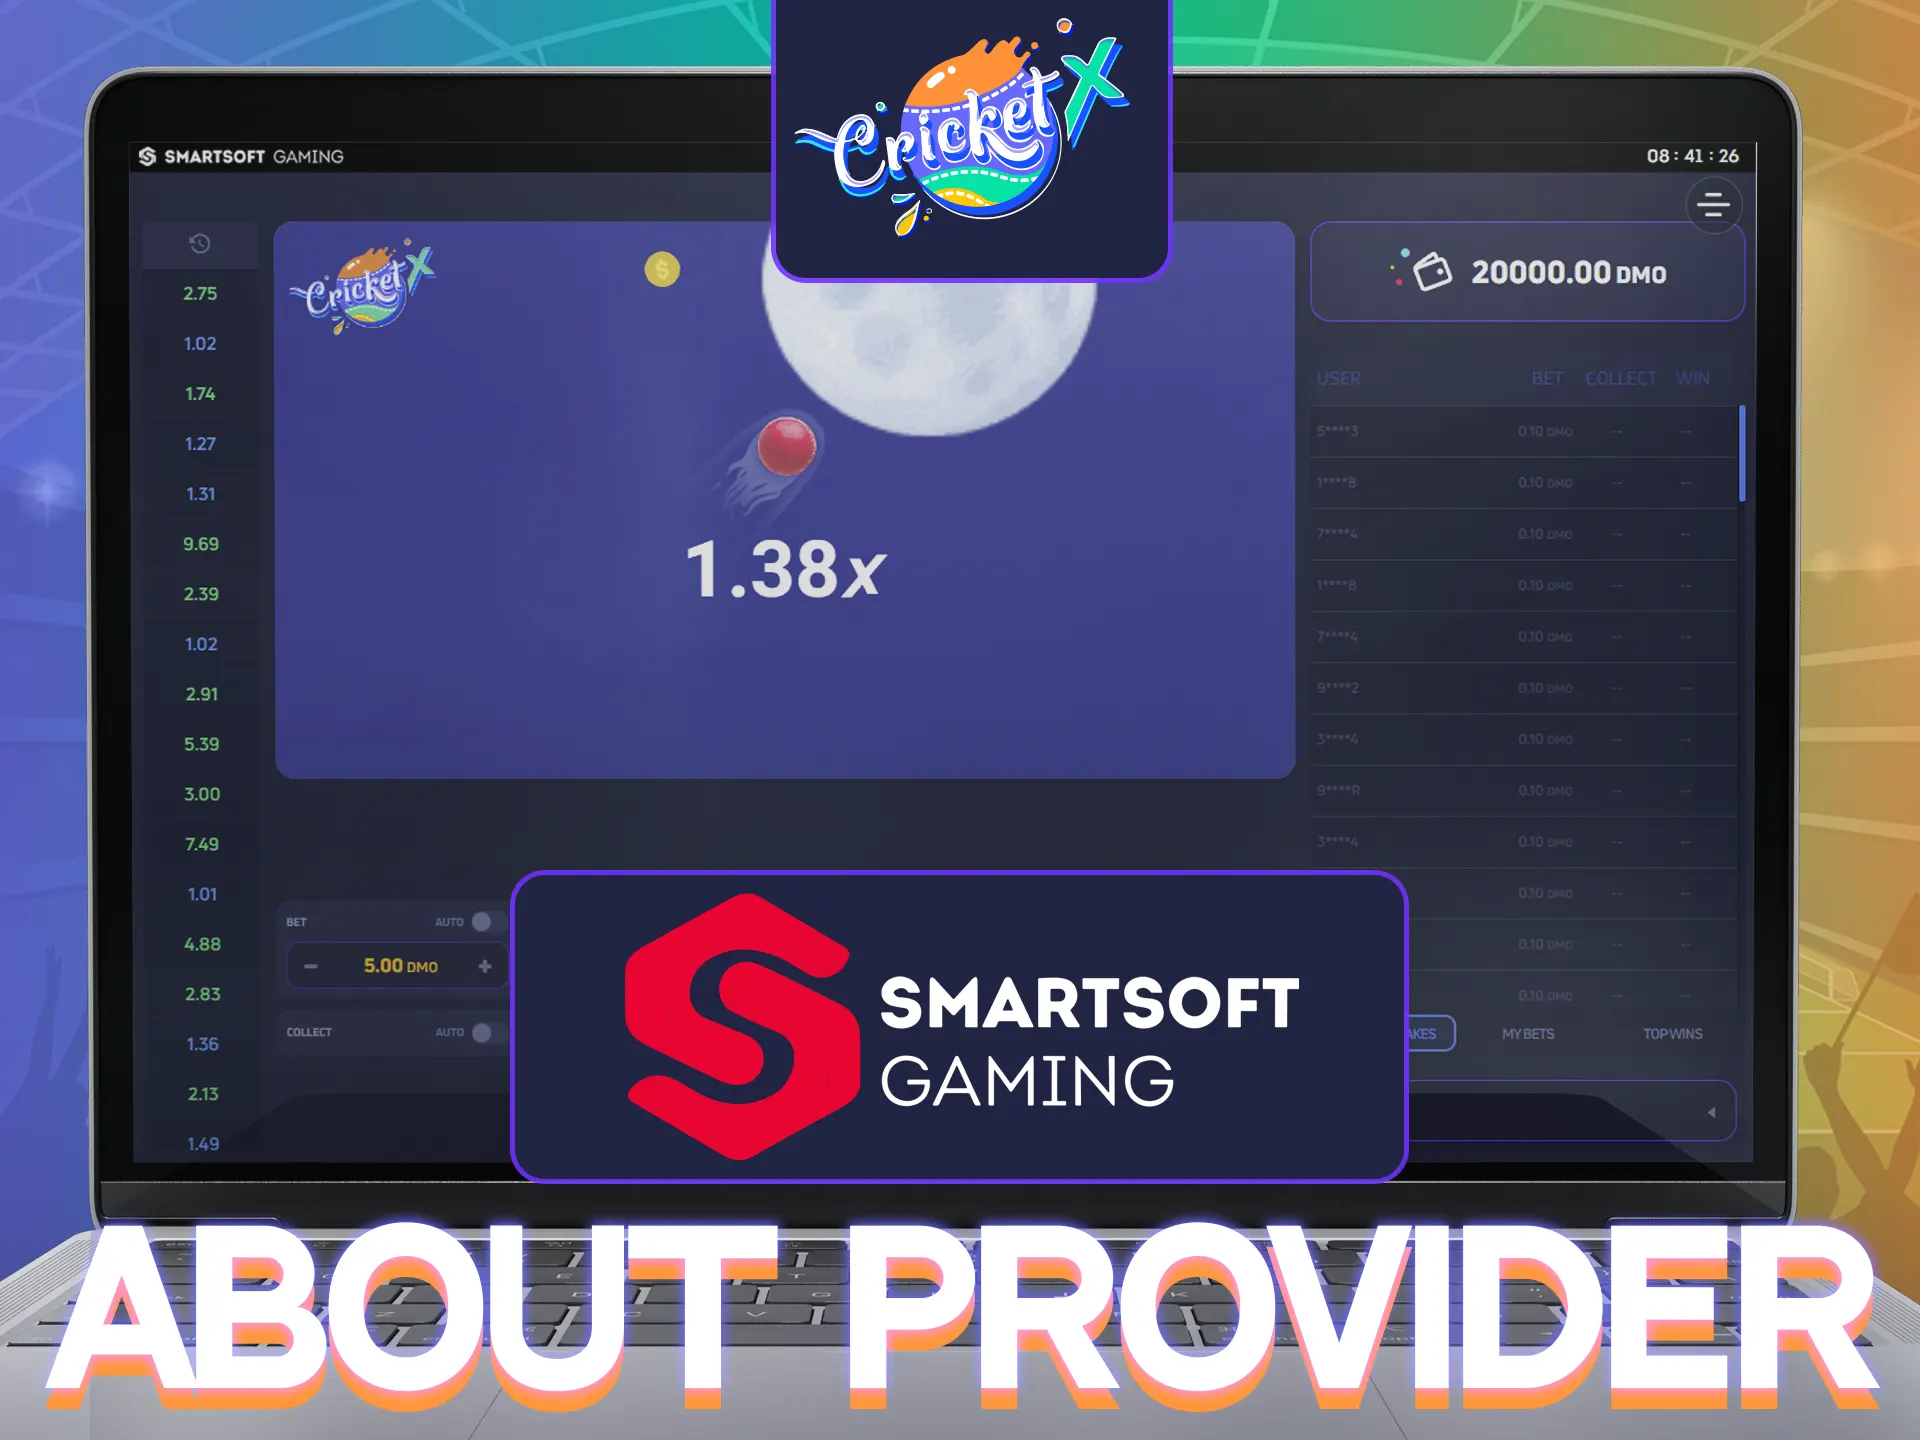 Check the info about CricketX game provider - Smartsoft Gaming.